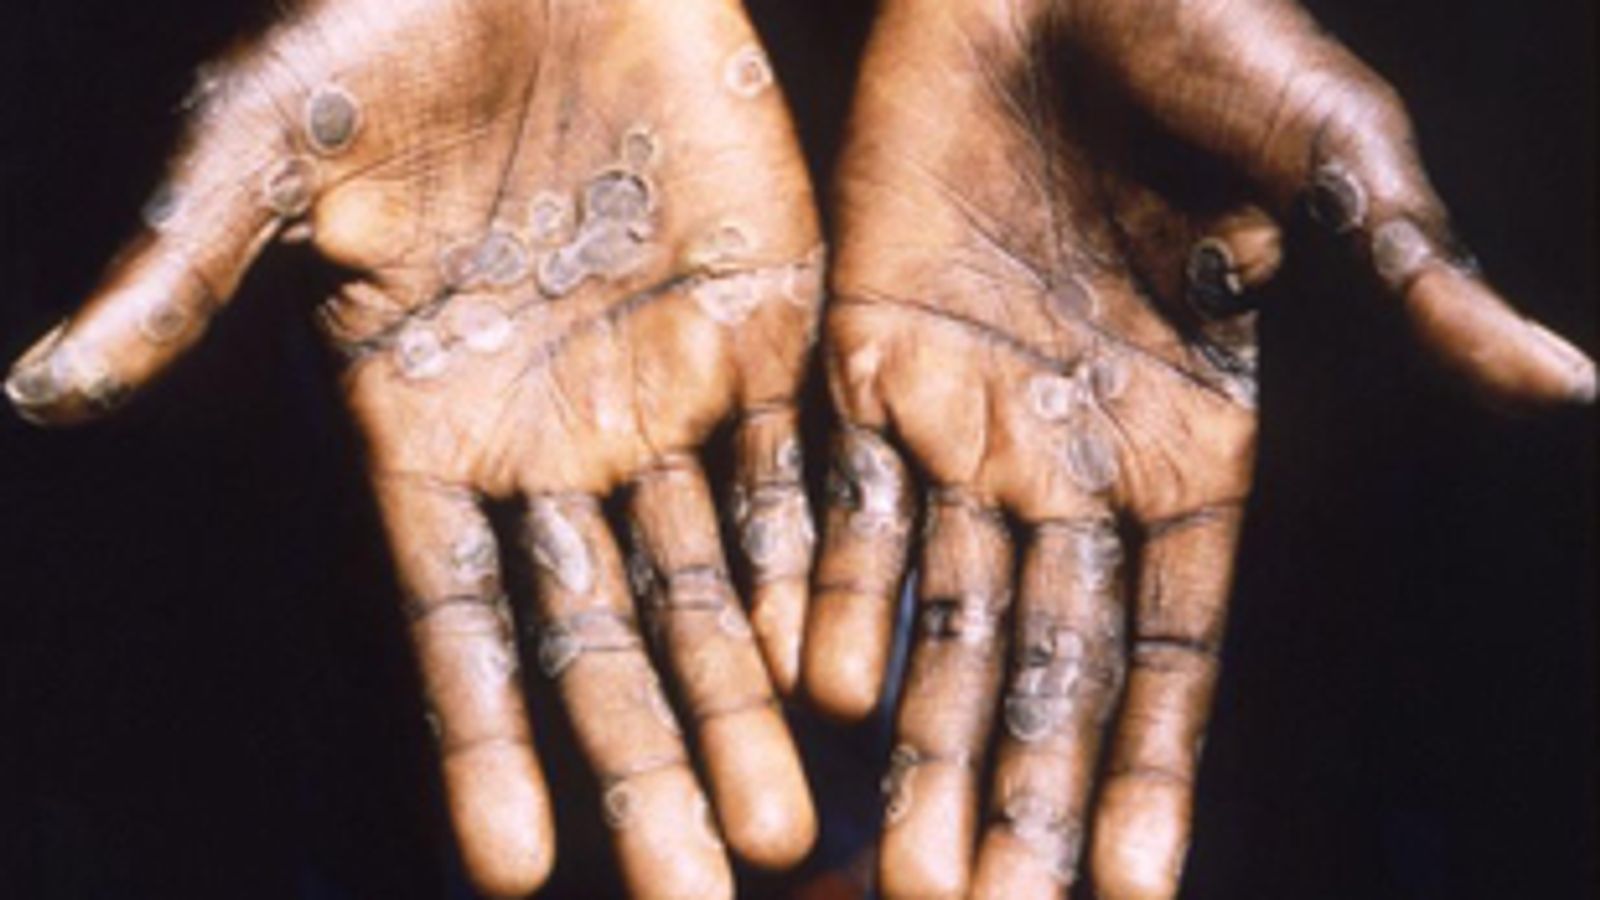 Two cases of monkeypox virus detected in Wales